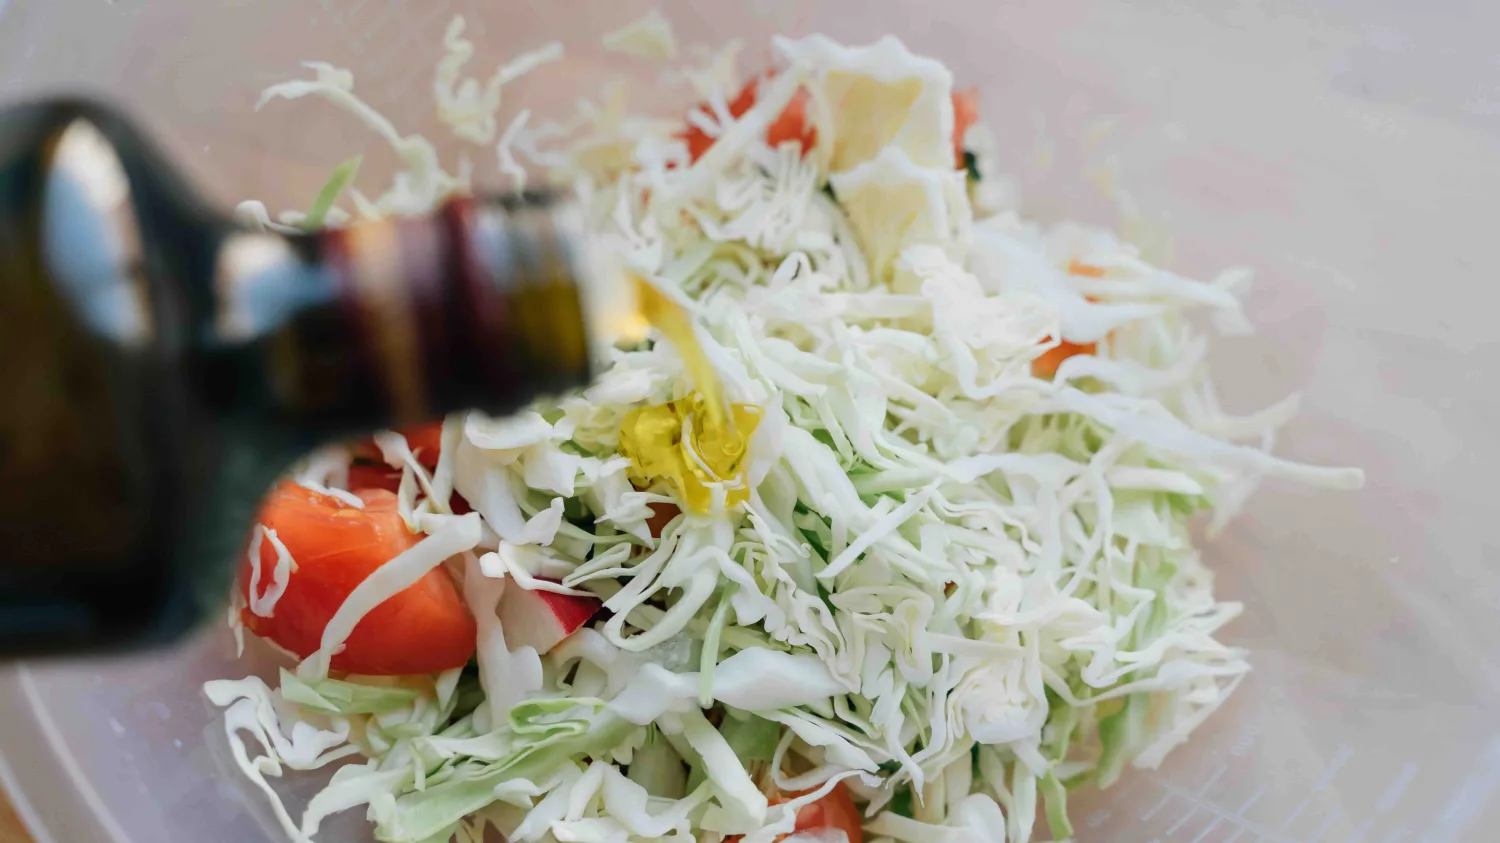 Example of coleslaw with olive oil dish